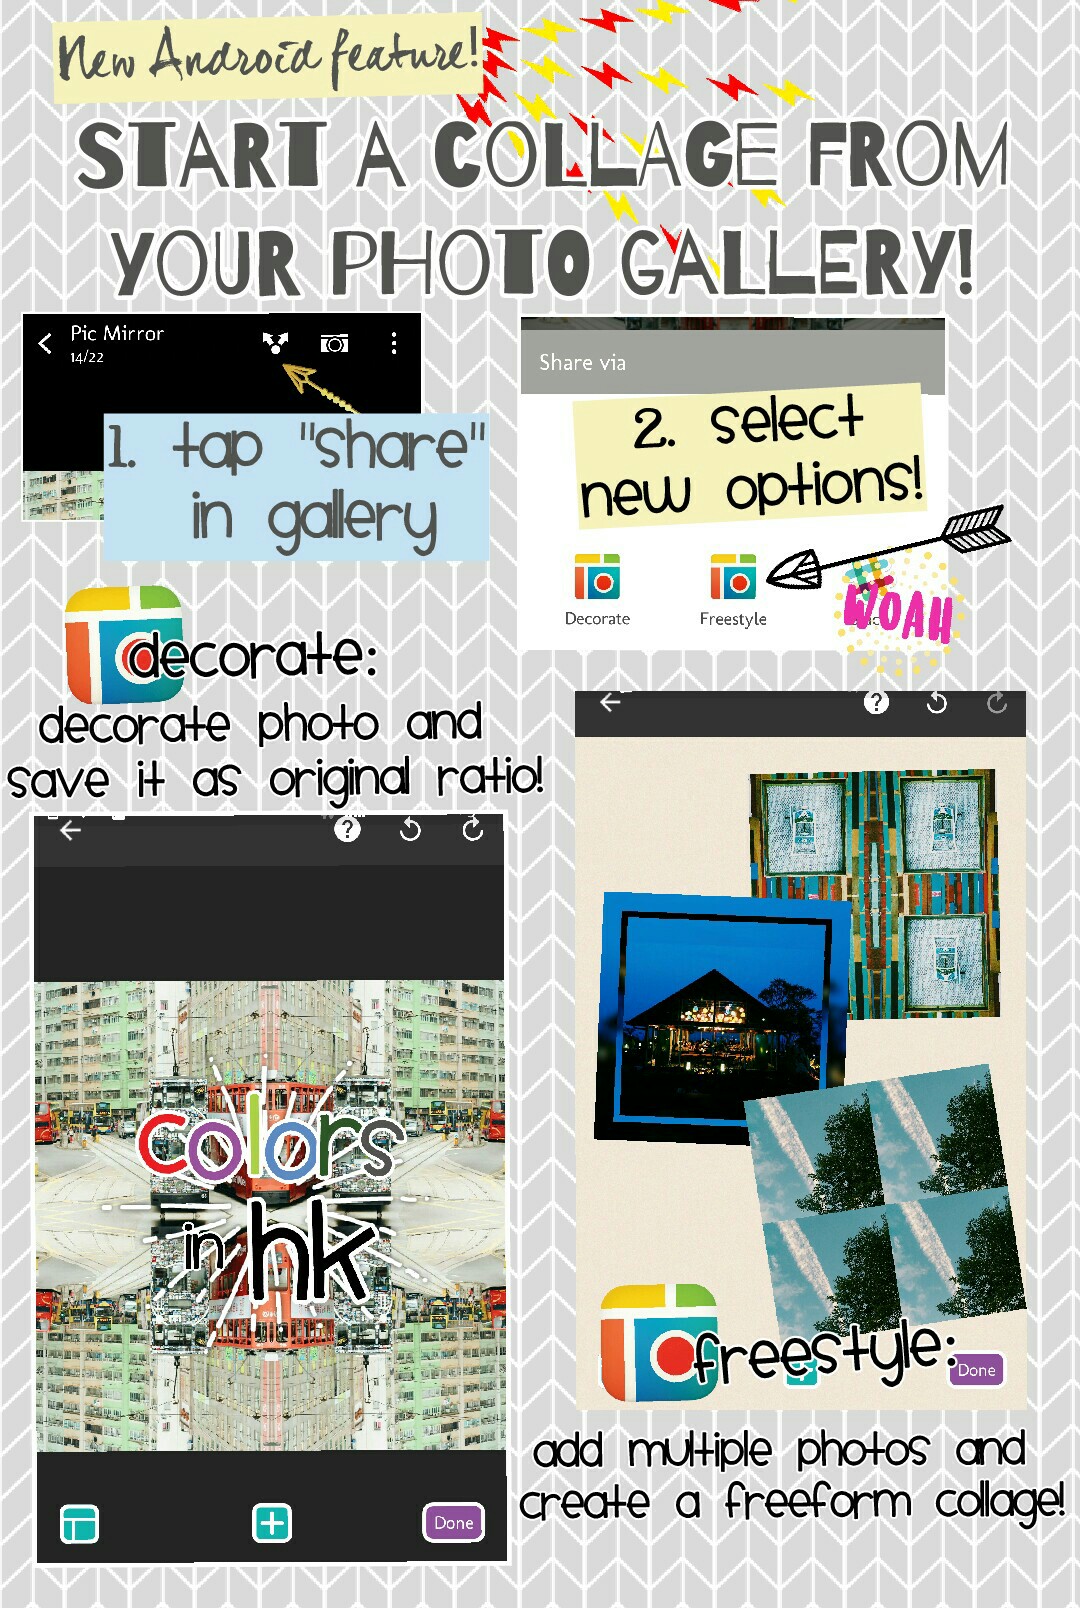 How to start a collage from 
your photo gallery on Android!